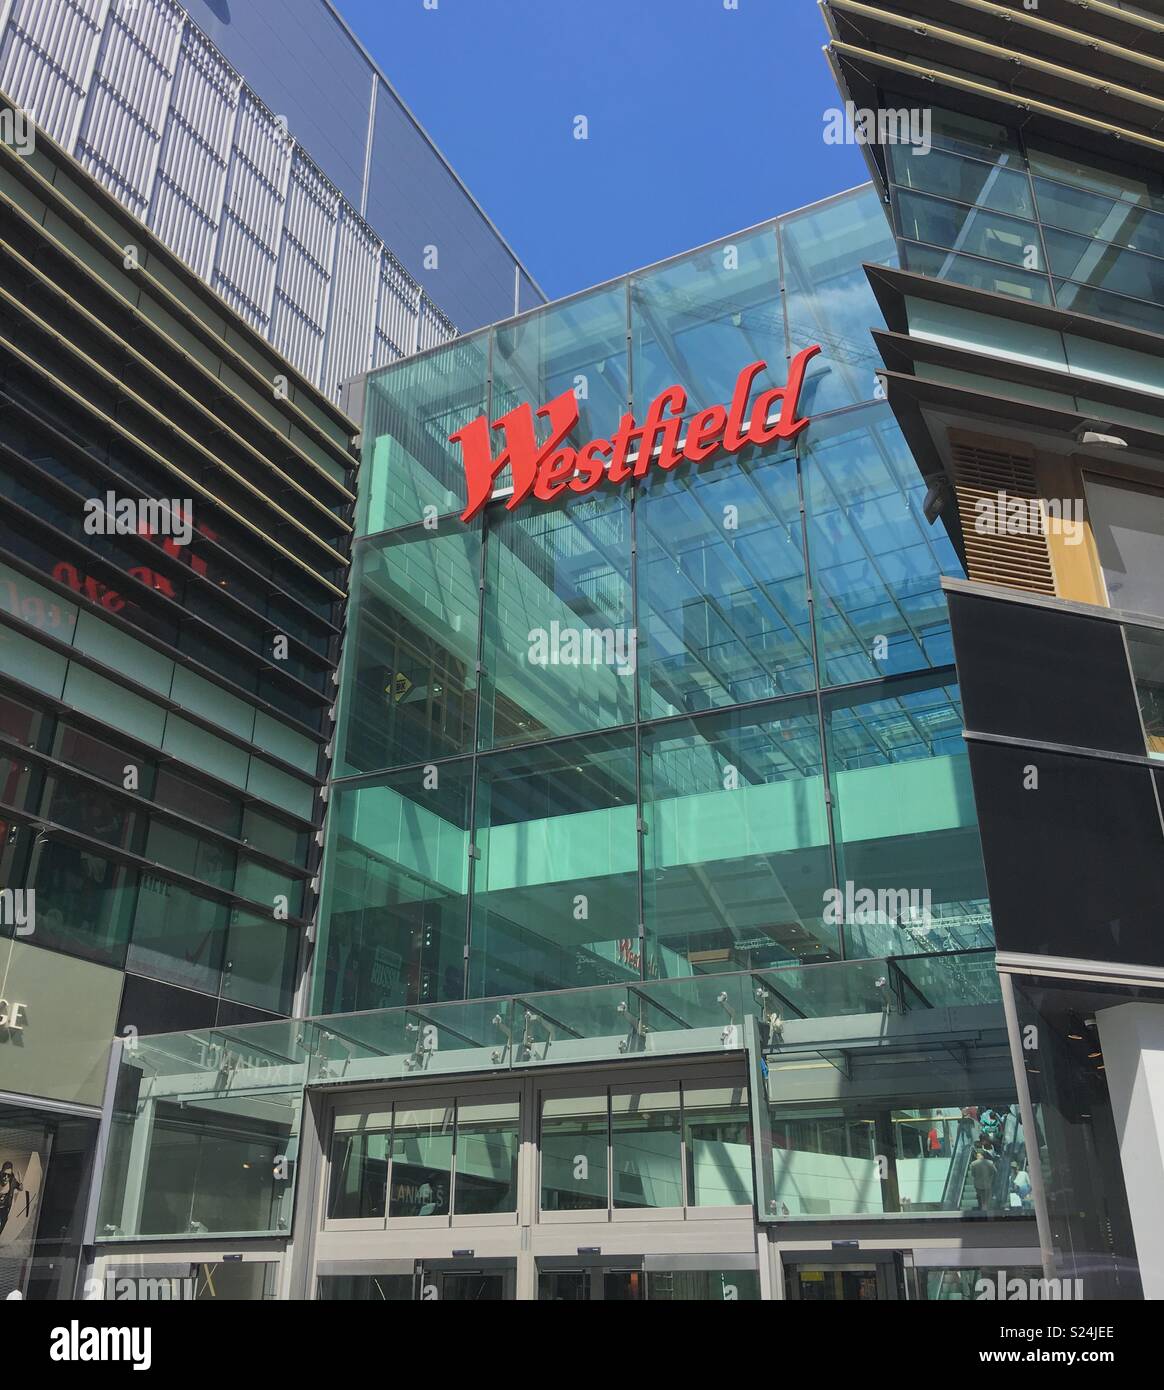 Westfield shopping centre - Stratford Stock Photo